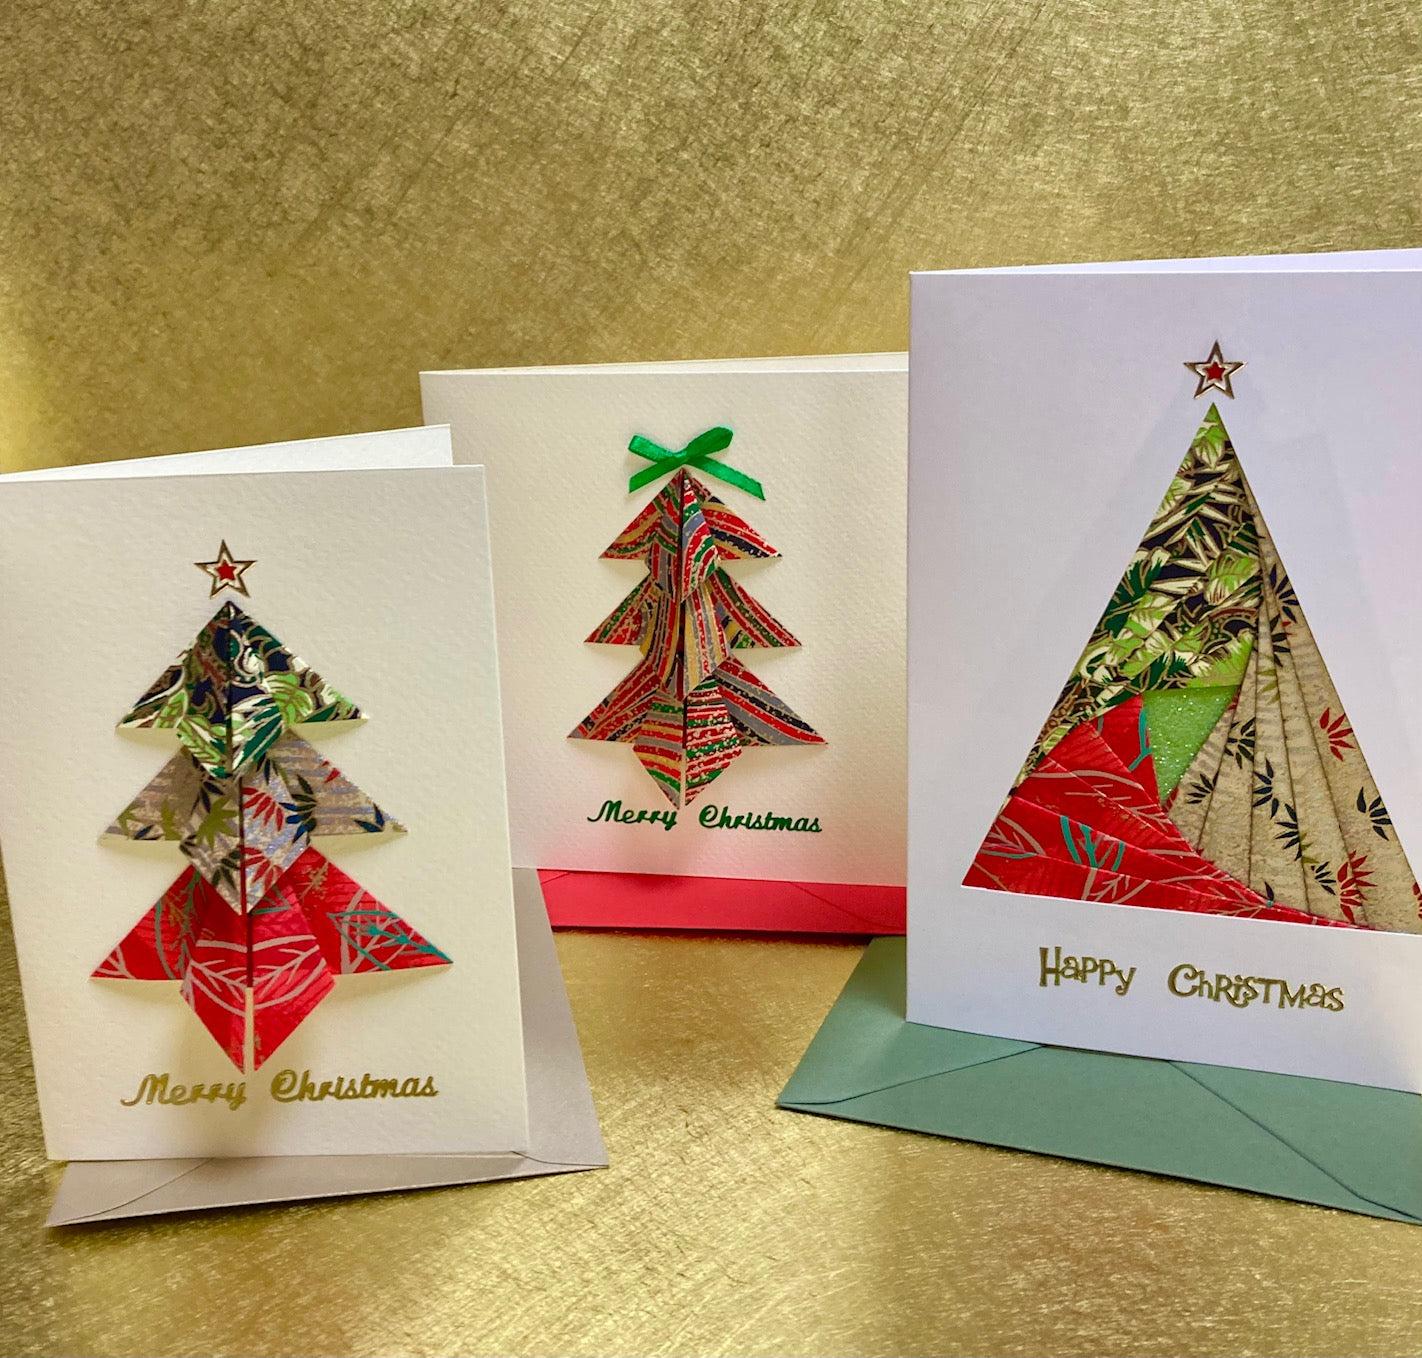 Christmas Card Workshop with Barbara O'Rahilly - Liberties Papers